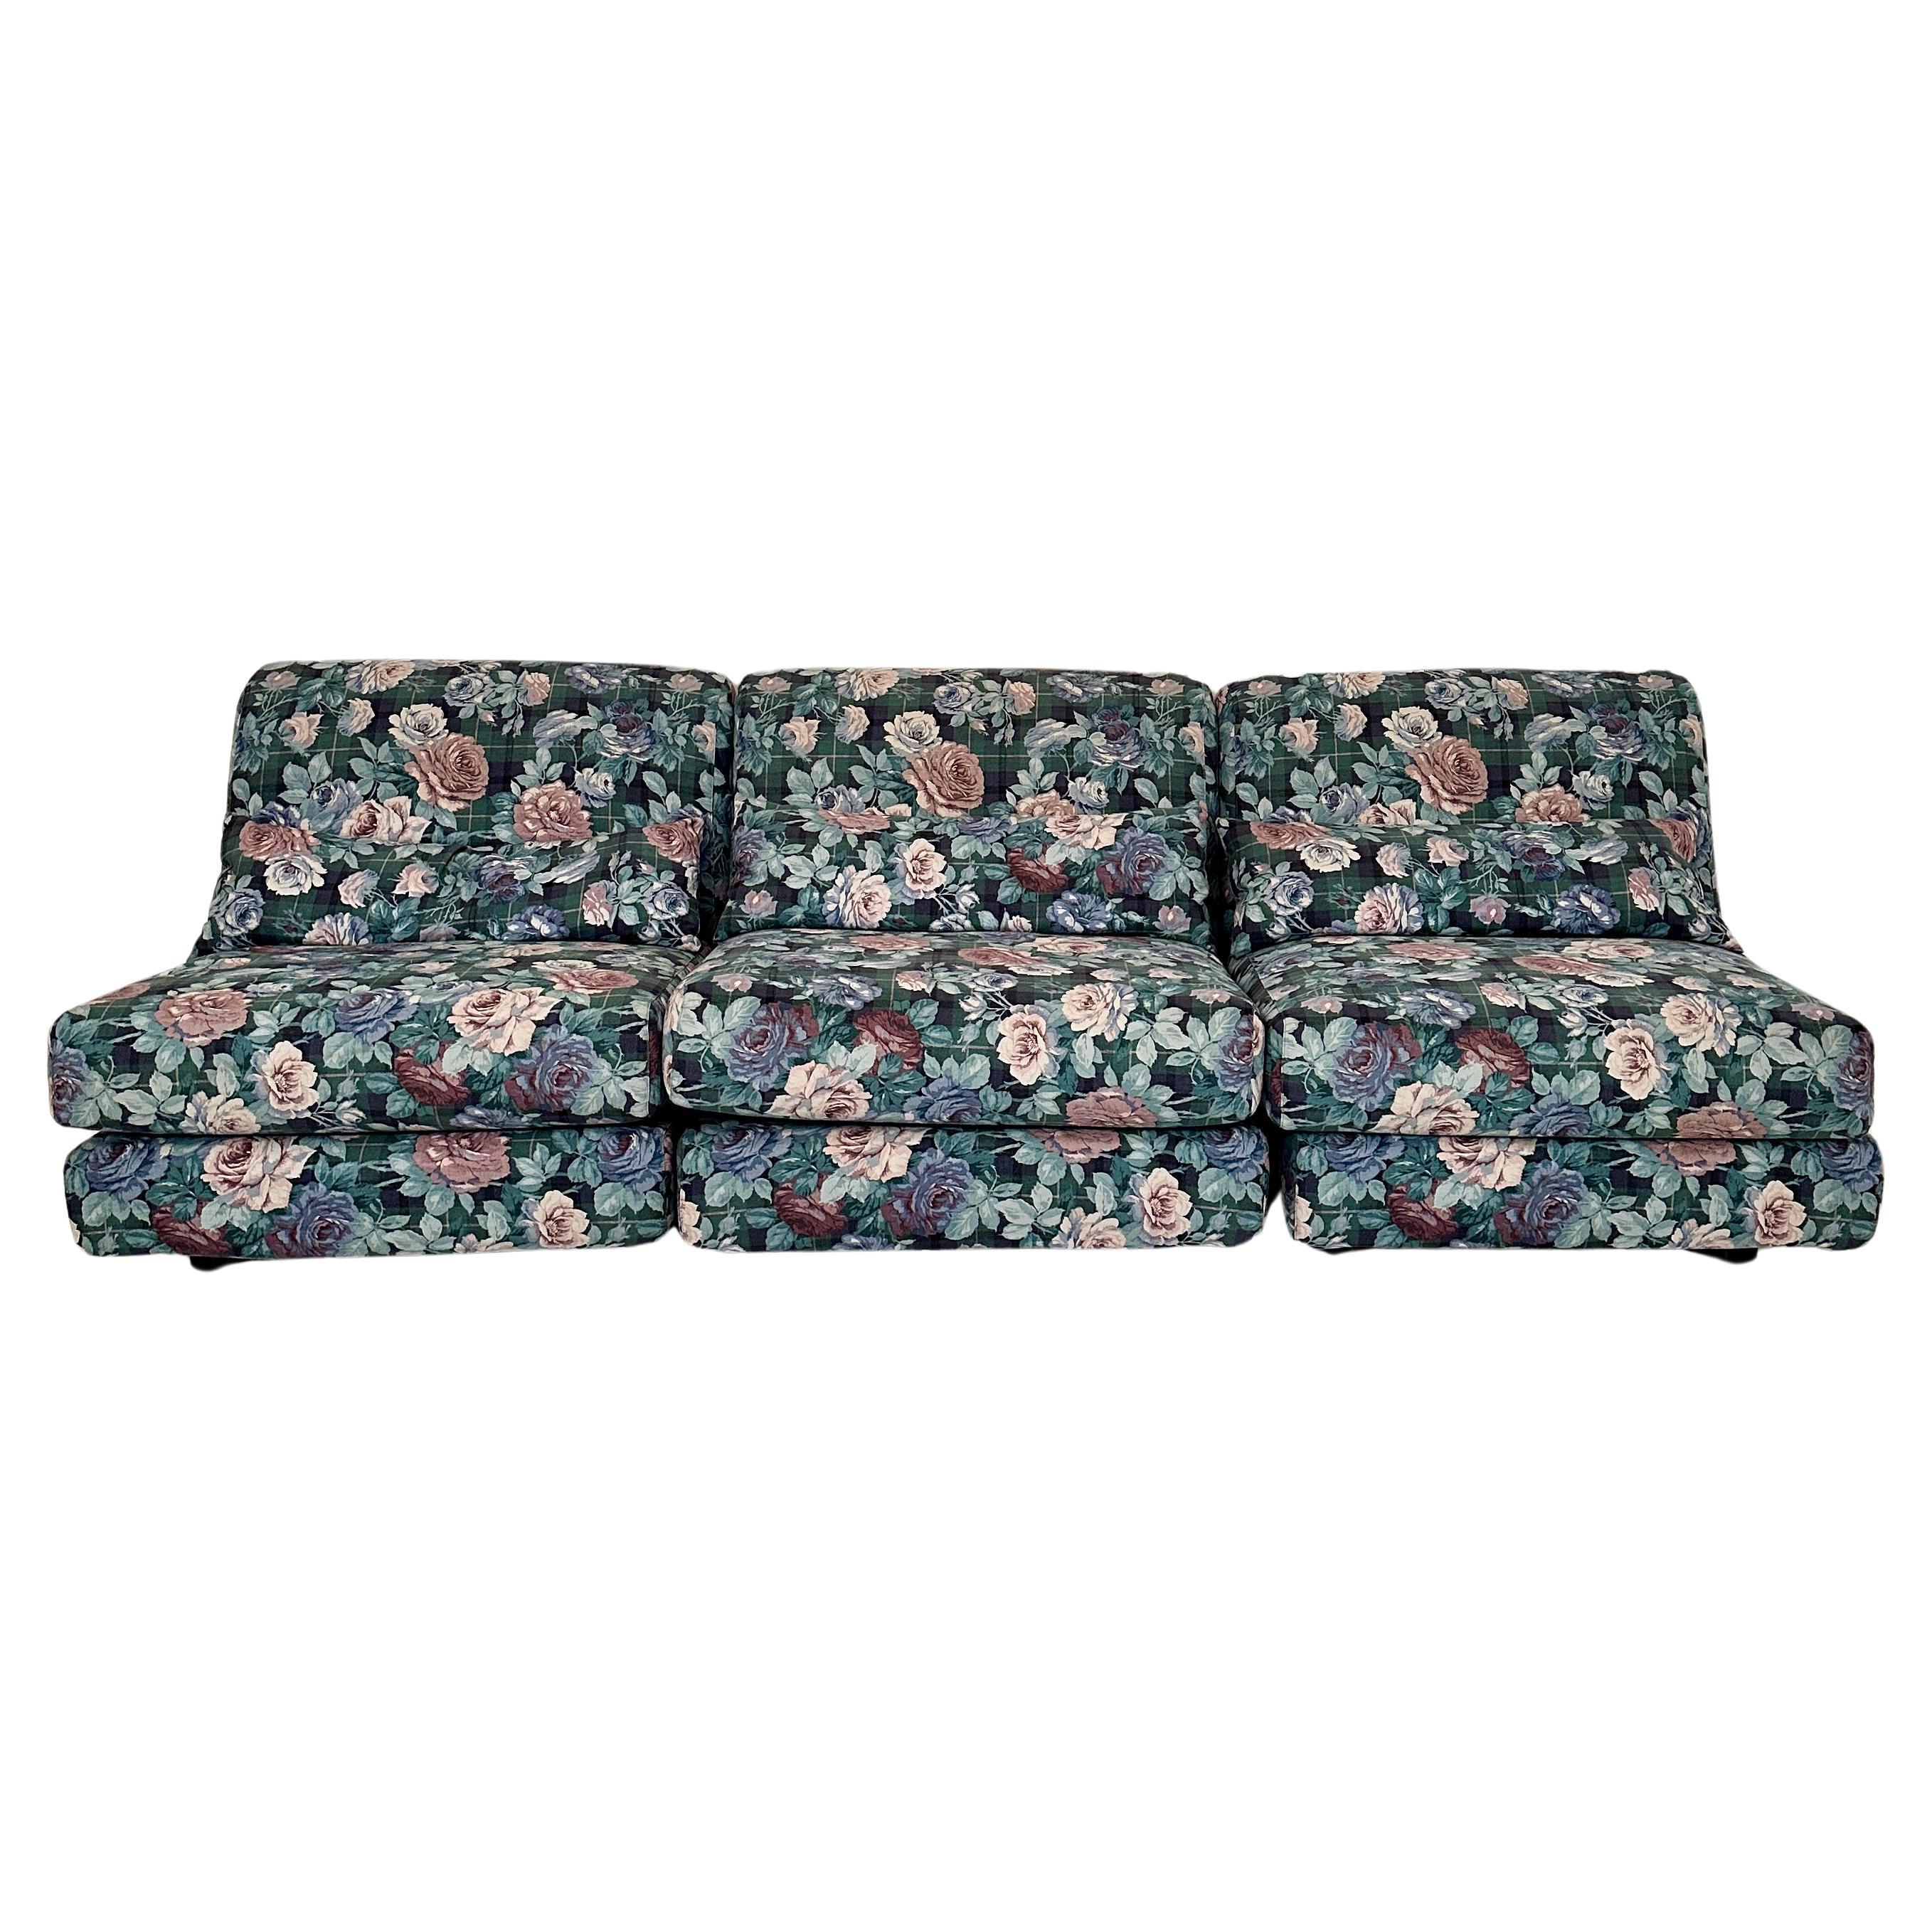 Mid Century Italian Modular Sofa in 3 Pieces with a Flower Fabric, around 1970 For Sale